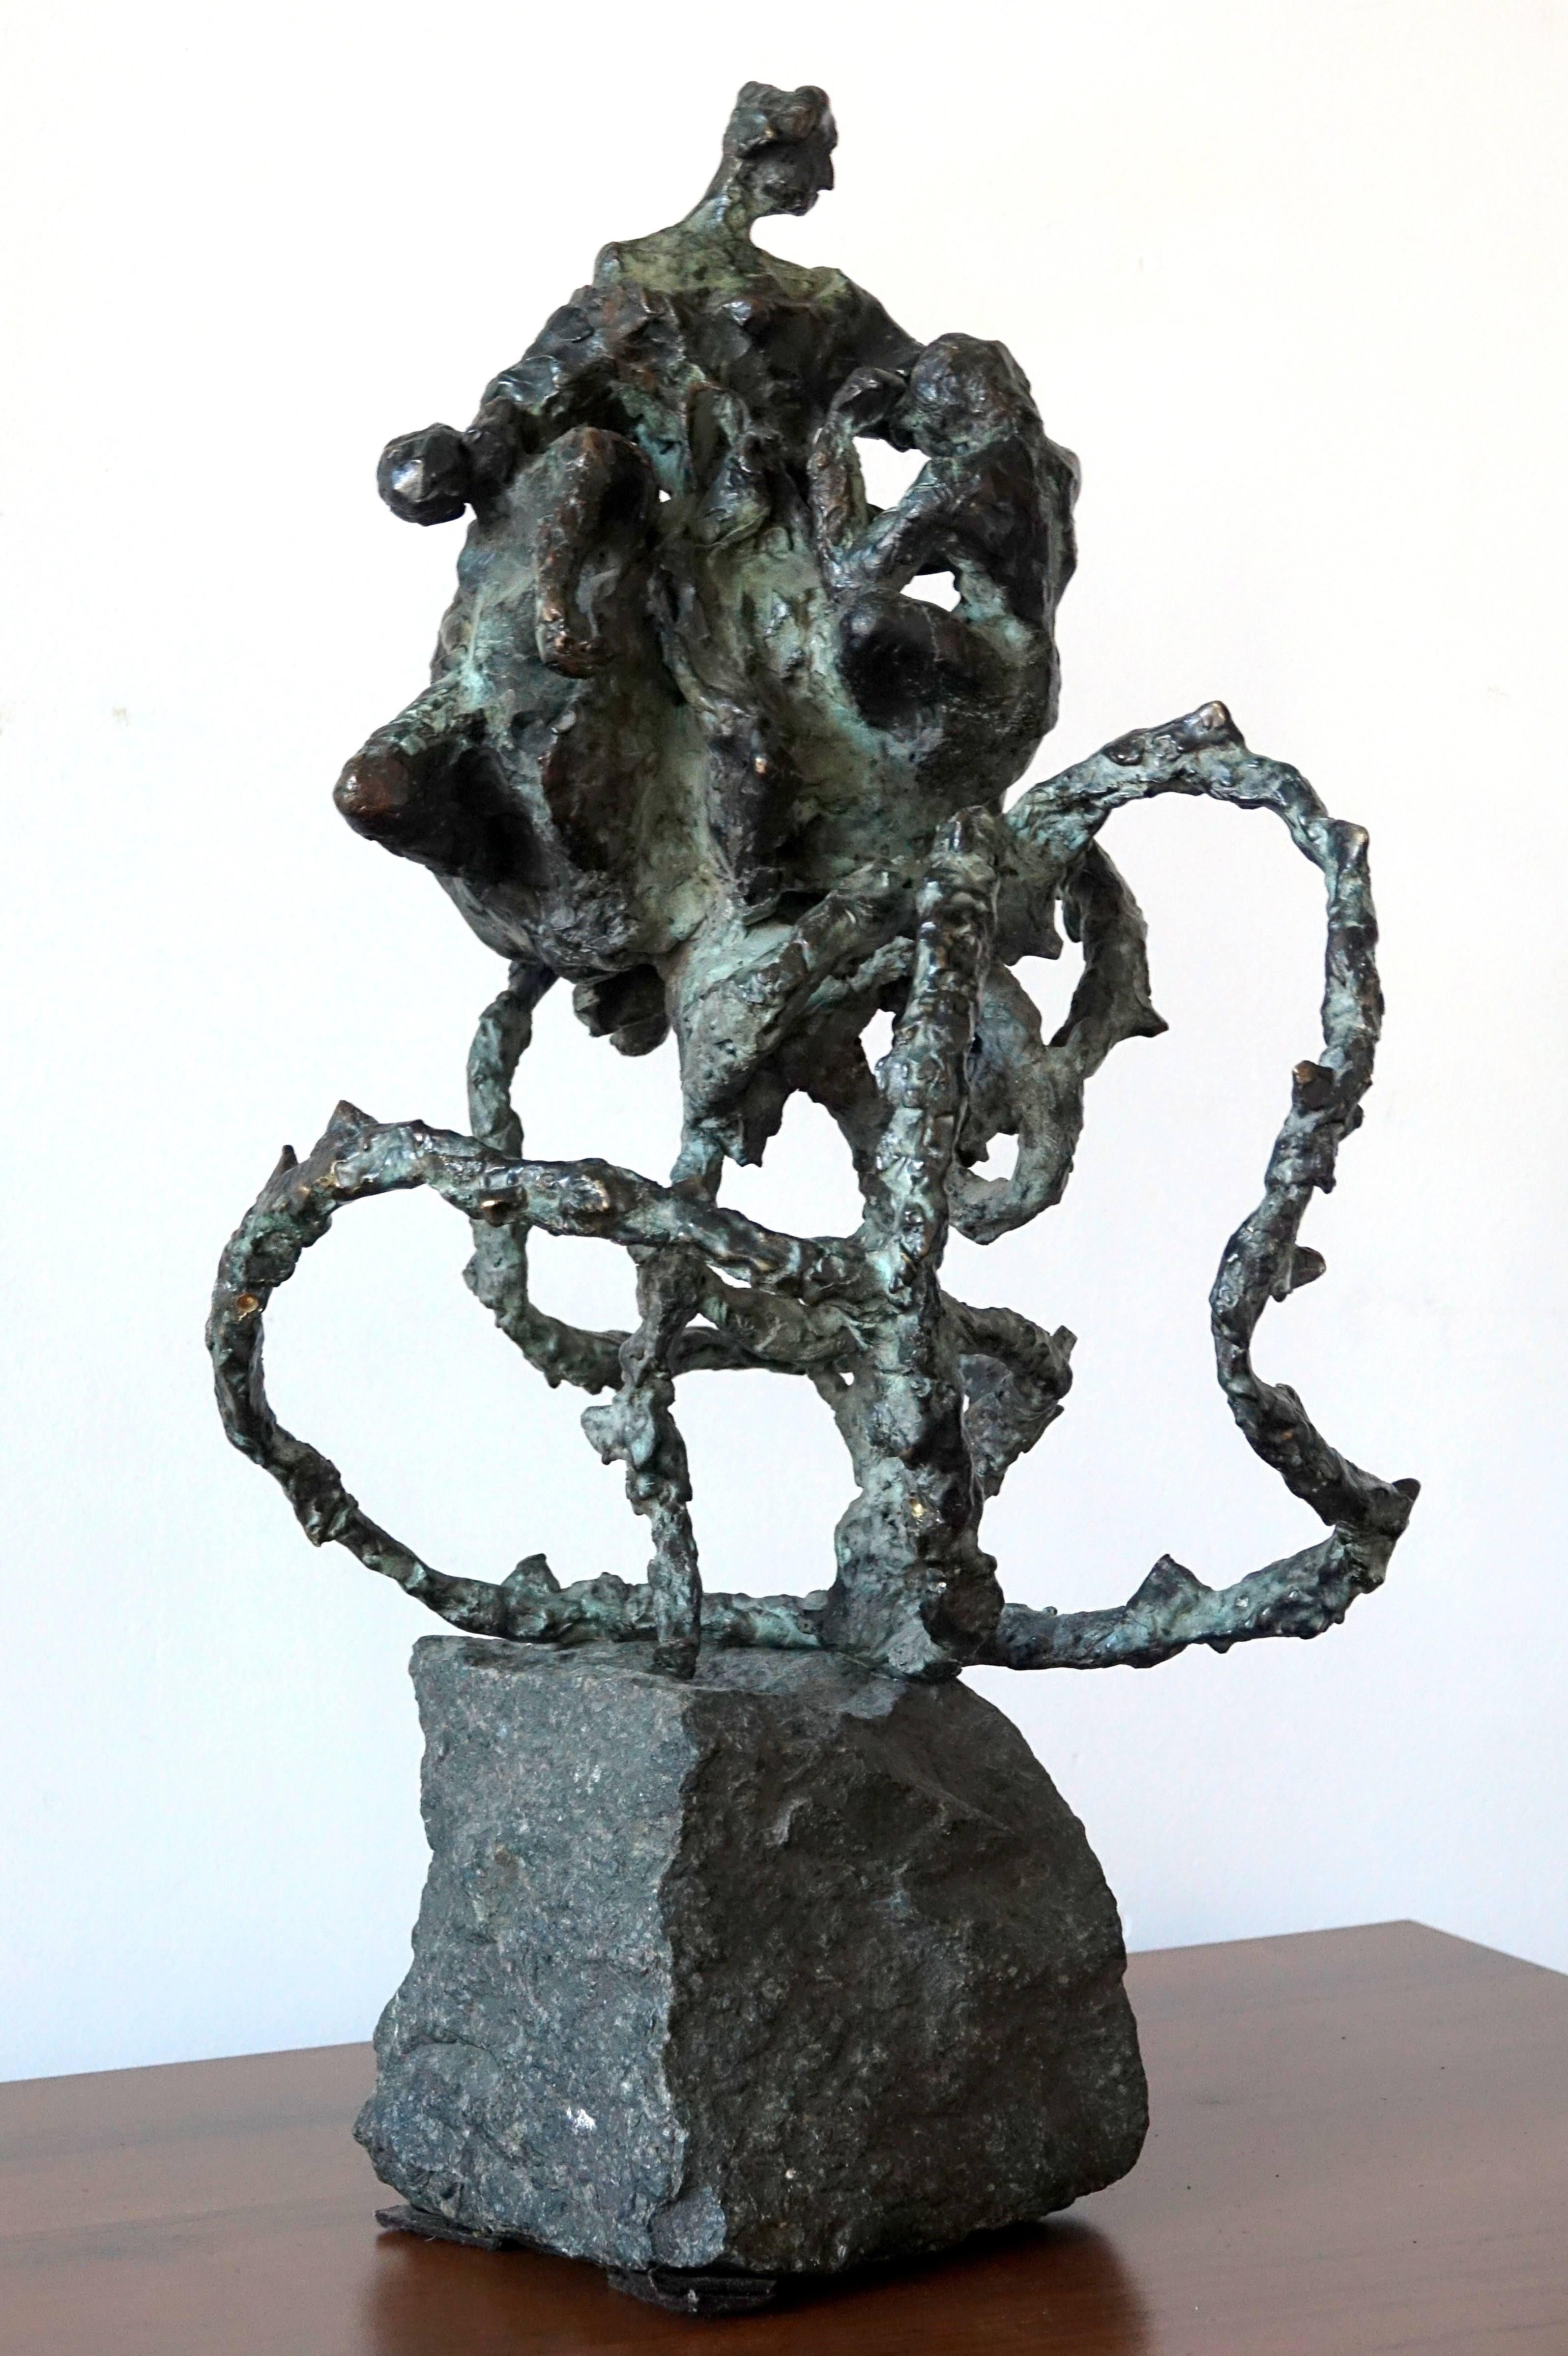 Polish-South African Modernist Bronze "The Rose" Expressionist Sculpture